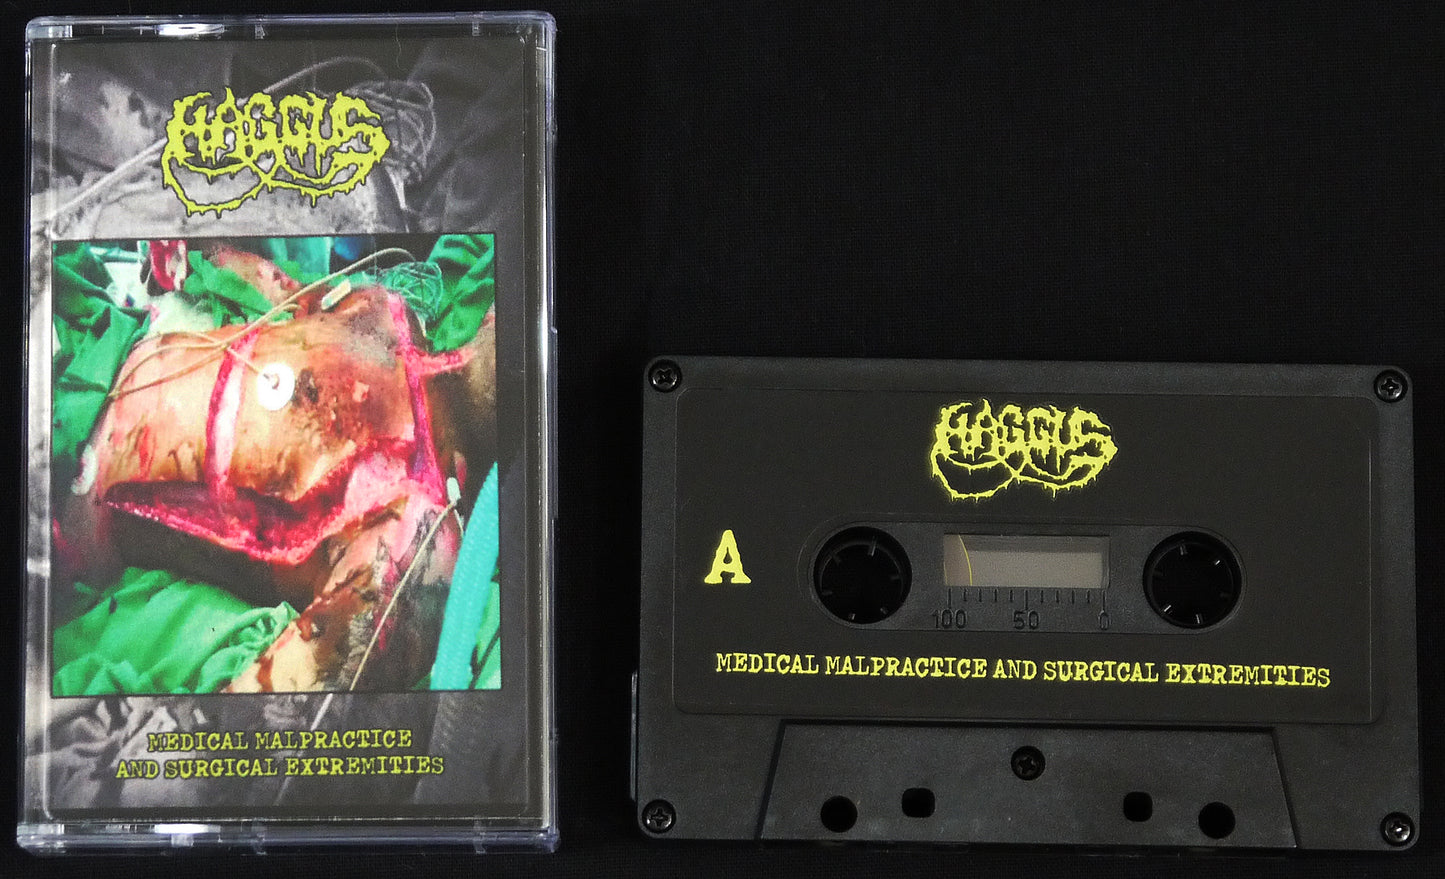 HAGGUS - Medical Malpractice And Surgical Extremities MC Tape